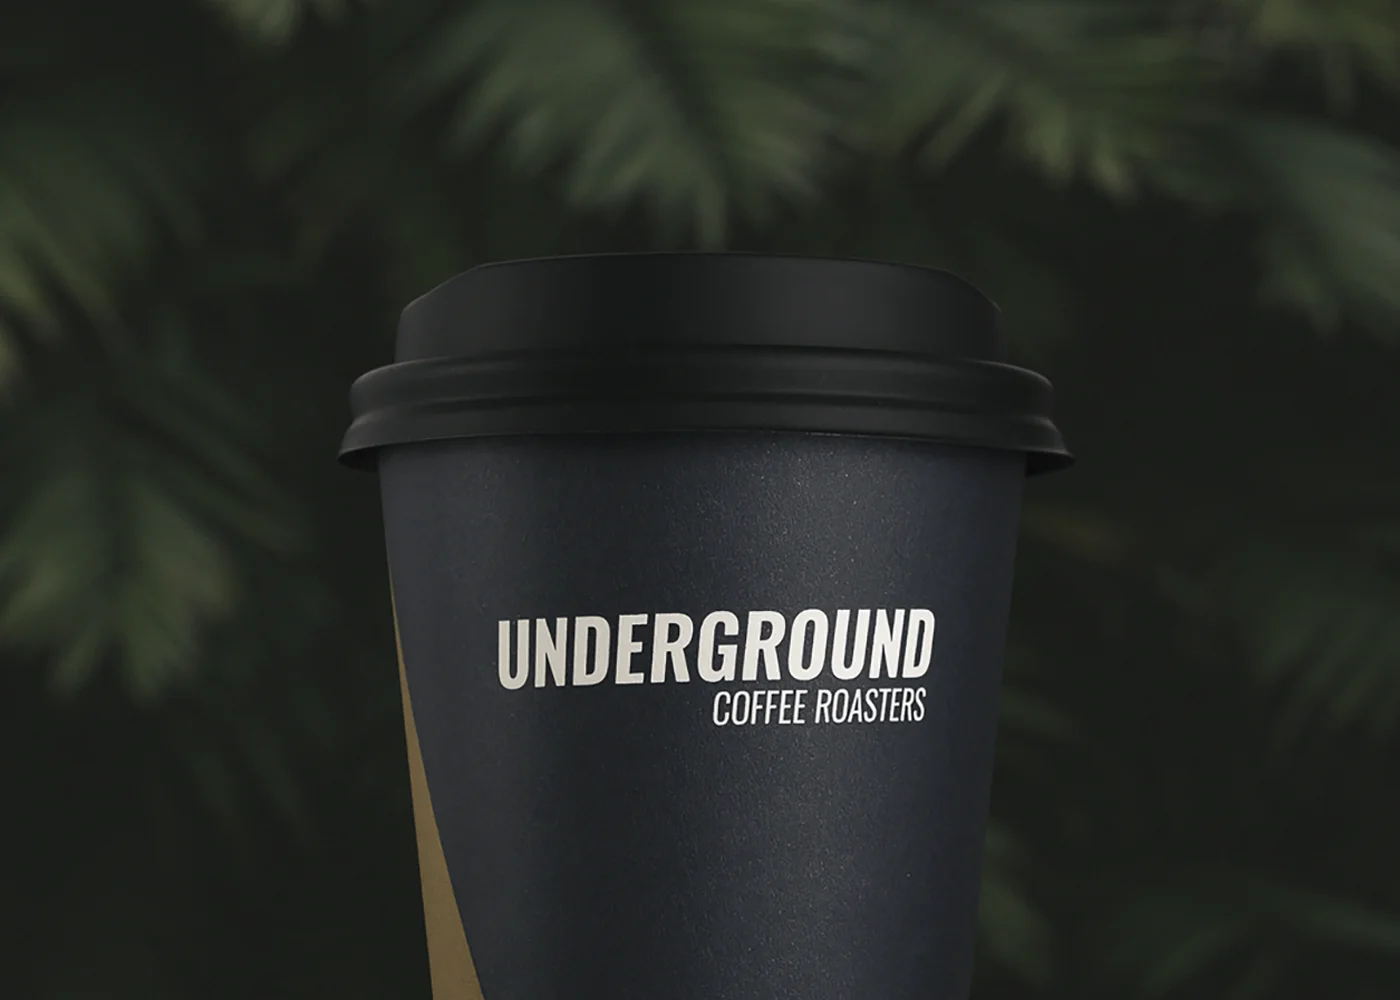 Underground Coffee Roasters biocup takeaway coffee cups